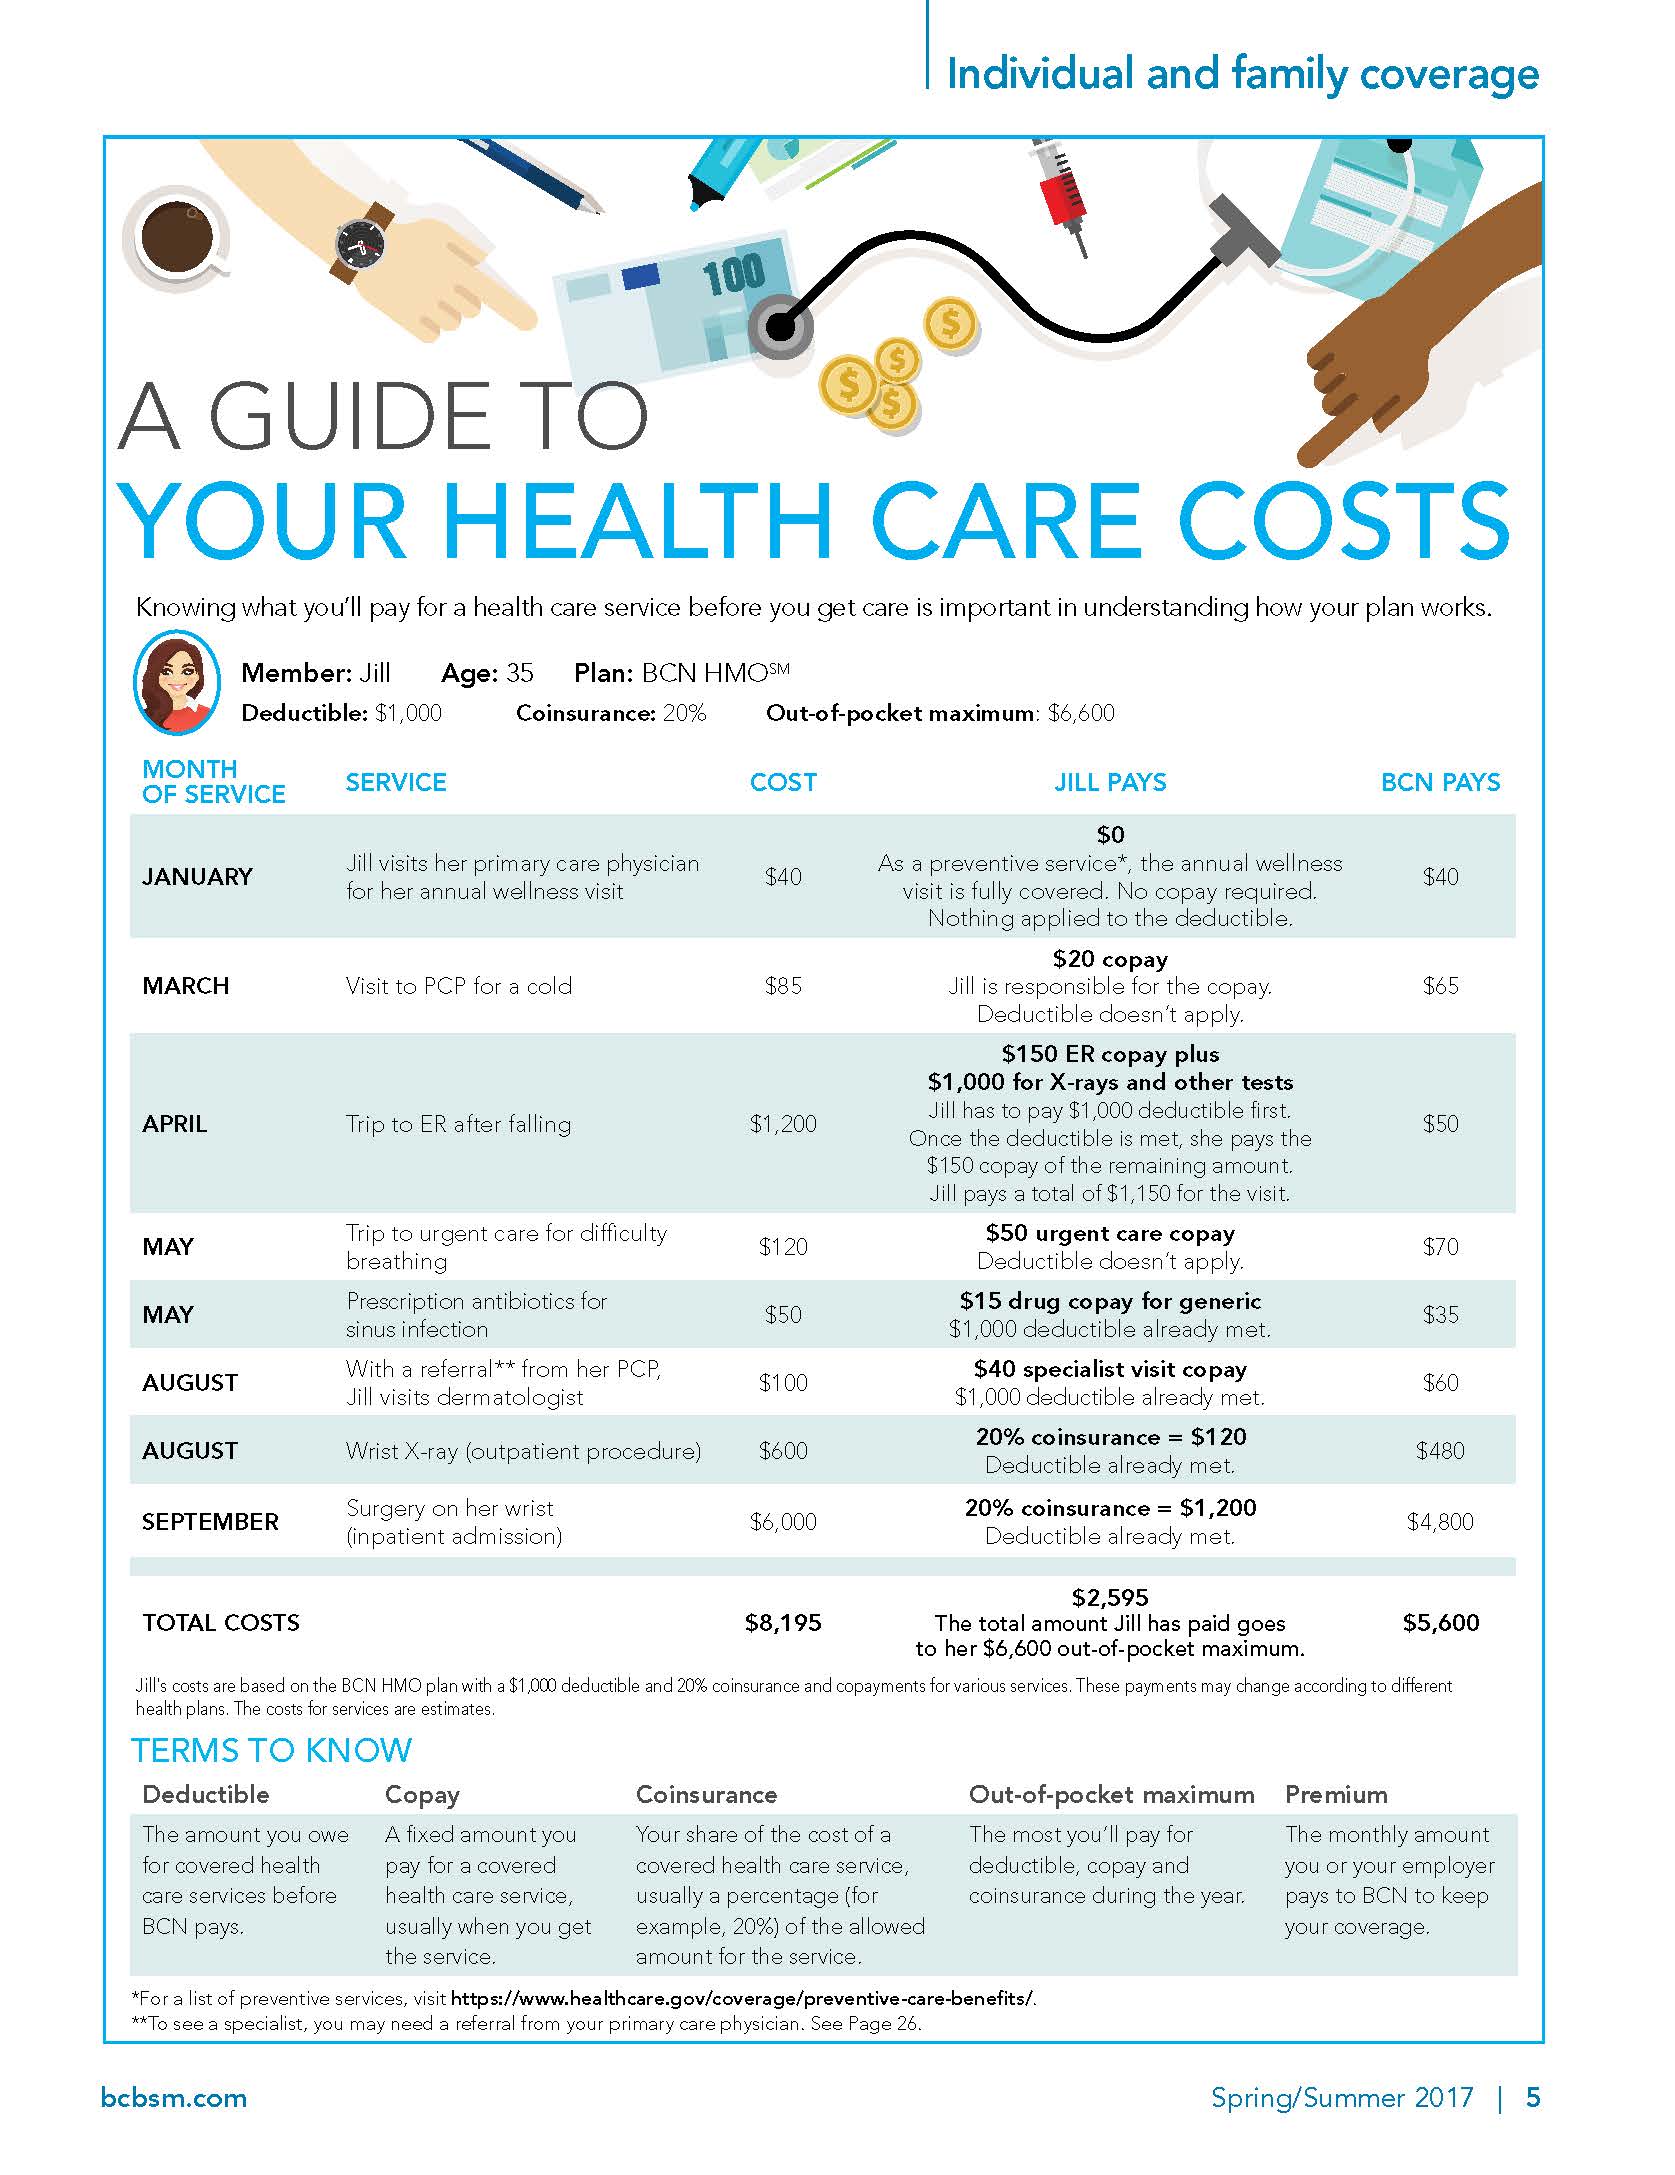 A Guide to your health care costs